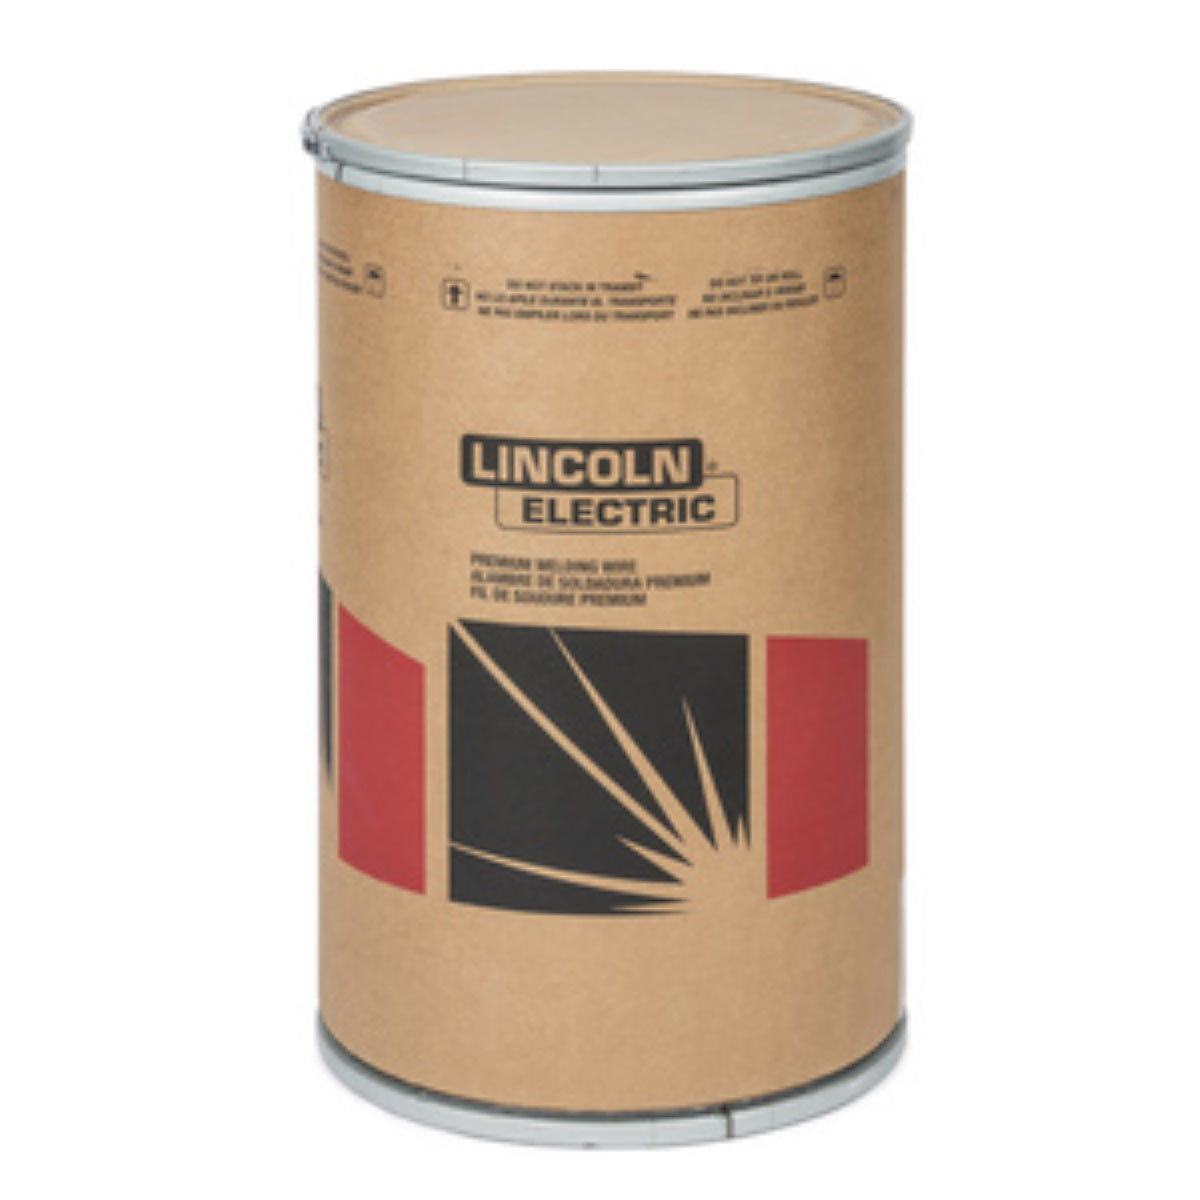 Lincoln Murex 309LSI Stainless MIG Wire .045 500lb Drum (ED0035610)